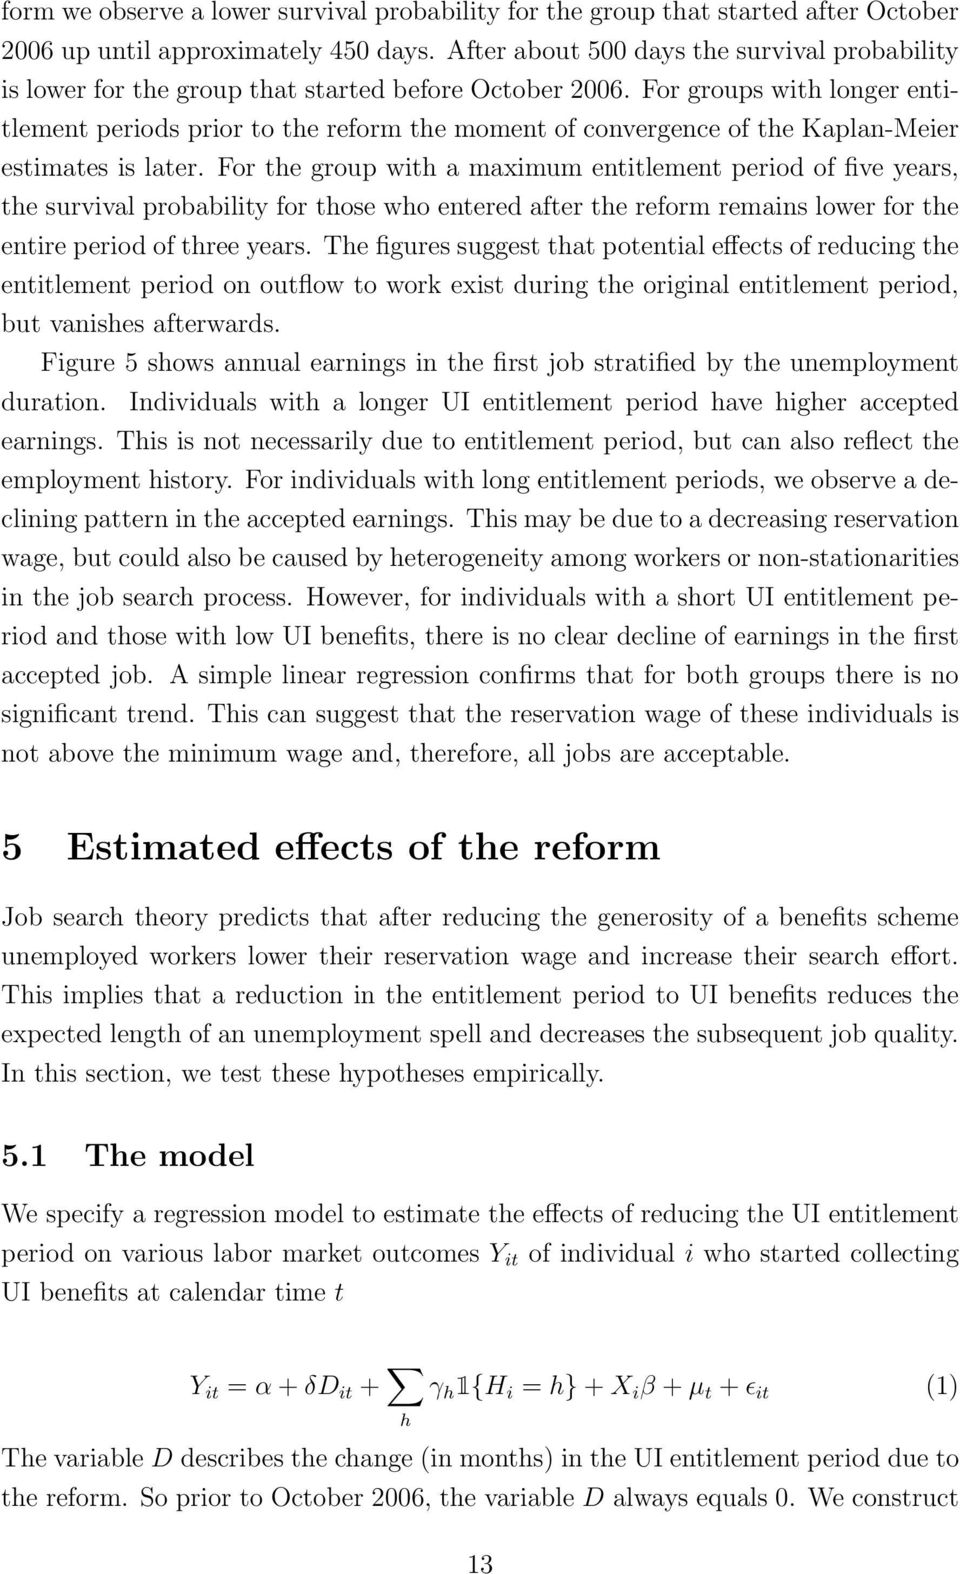 For groups with longer entitlement periods prior to the reform the moment of convergence of the Kaplan-Meier estimates is later.